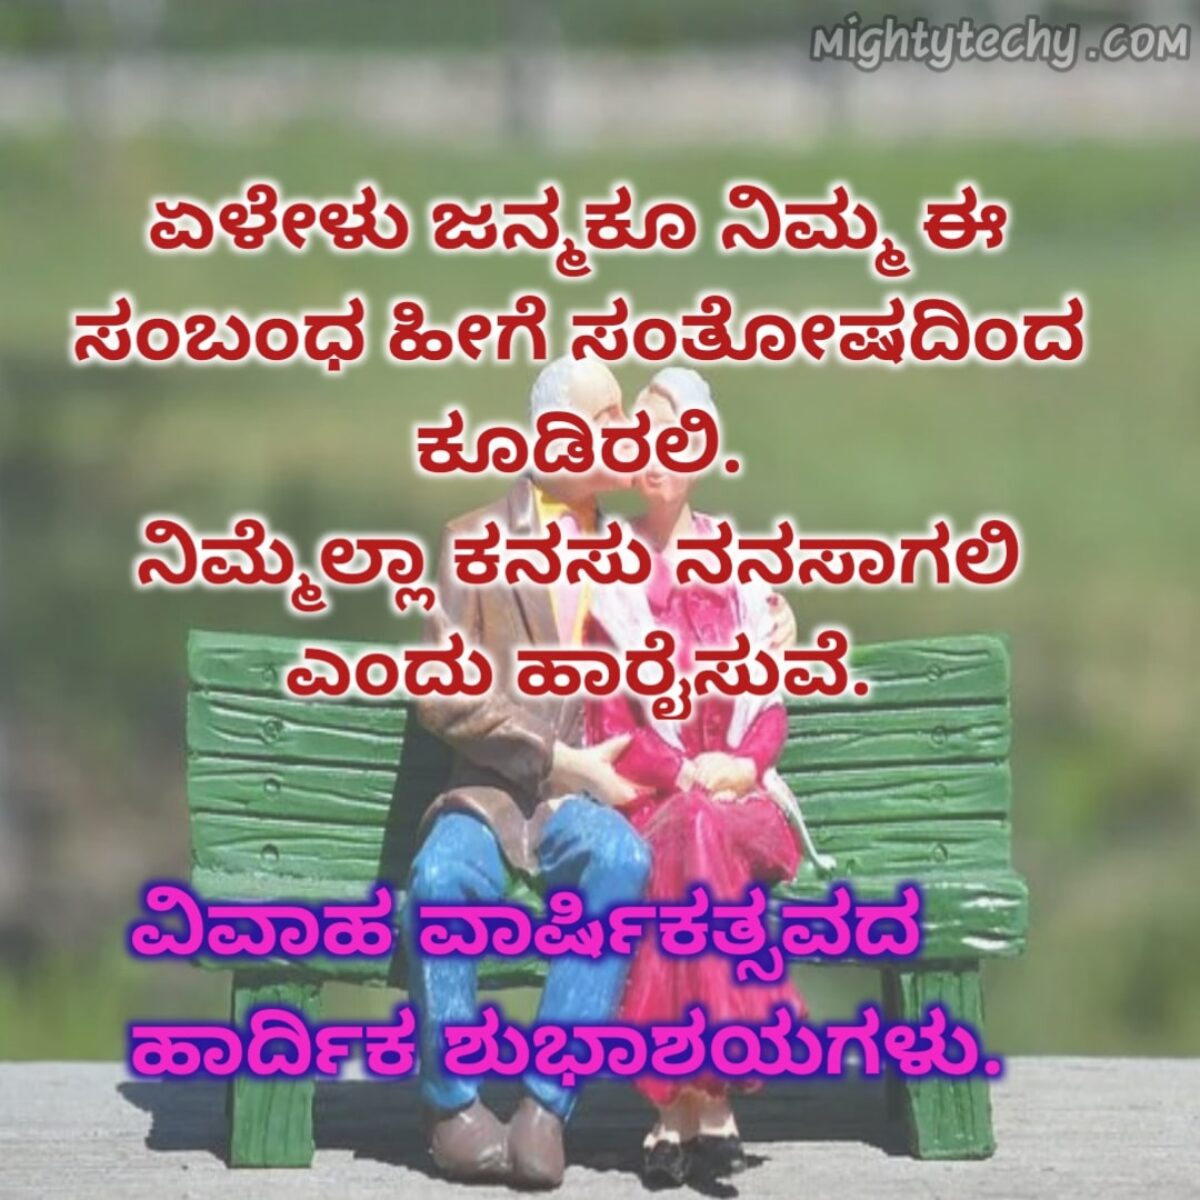 wedding-anniversary-wishes-in-kannada-cheapest-prices-save-49